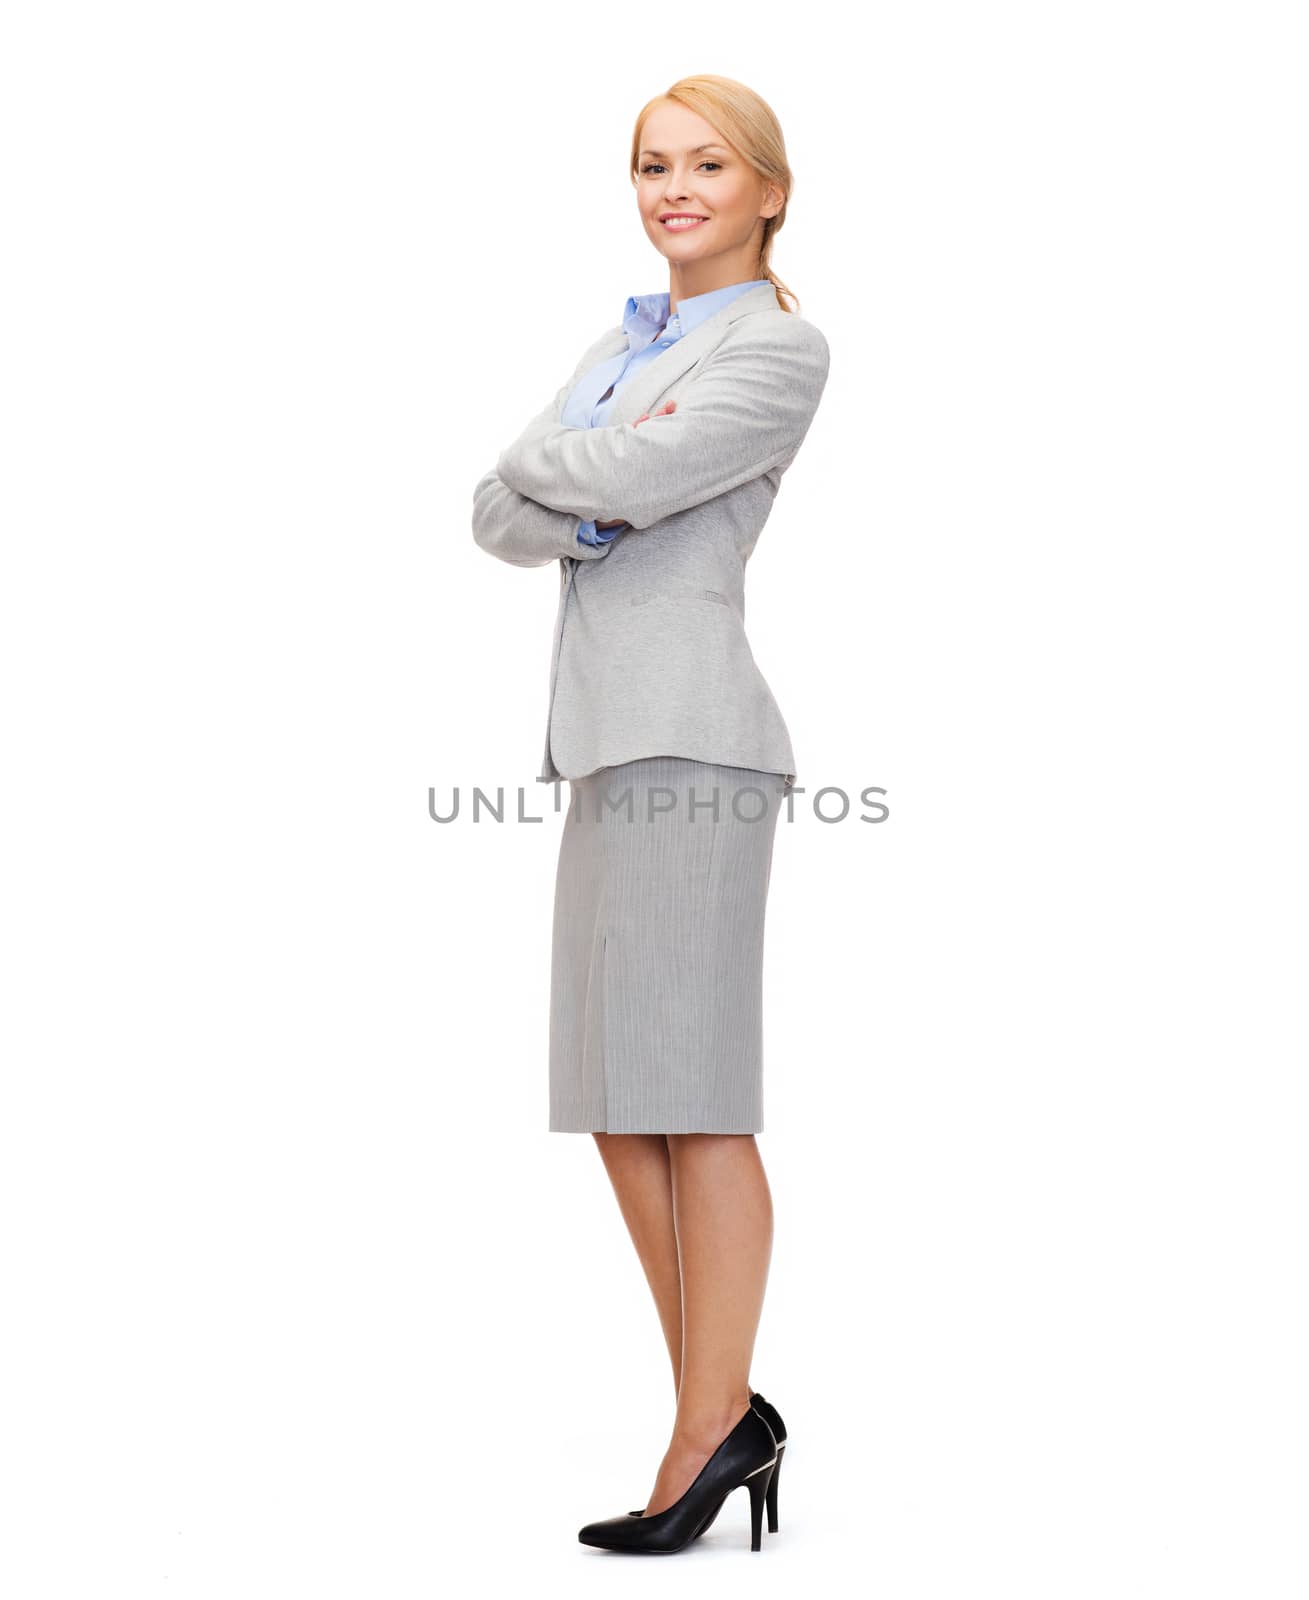 smiling businesswoman with crossed arms by dolgachov